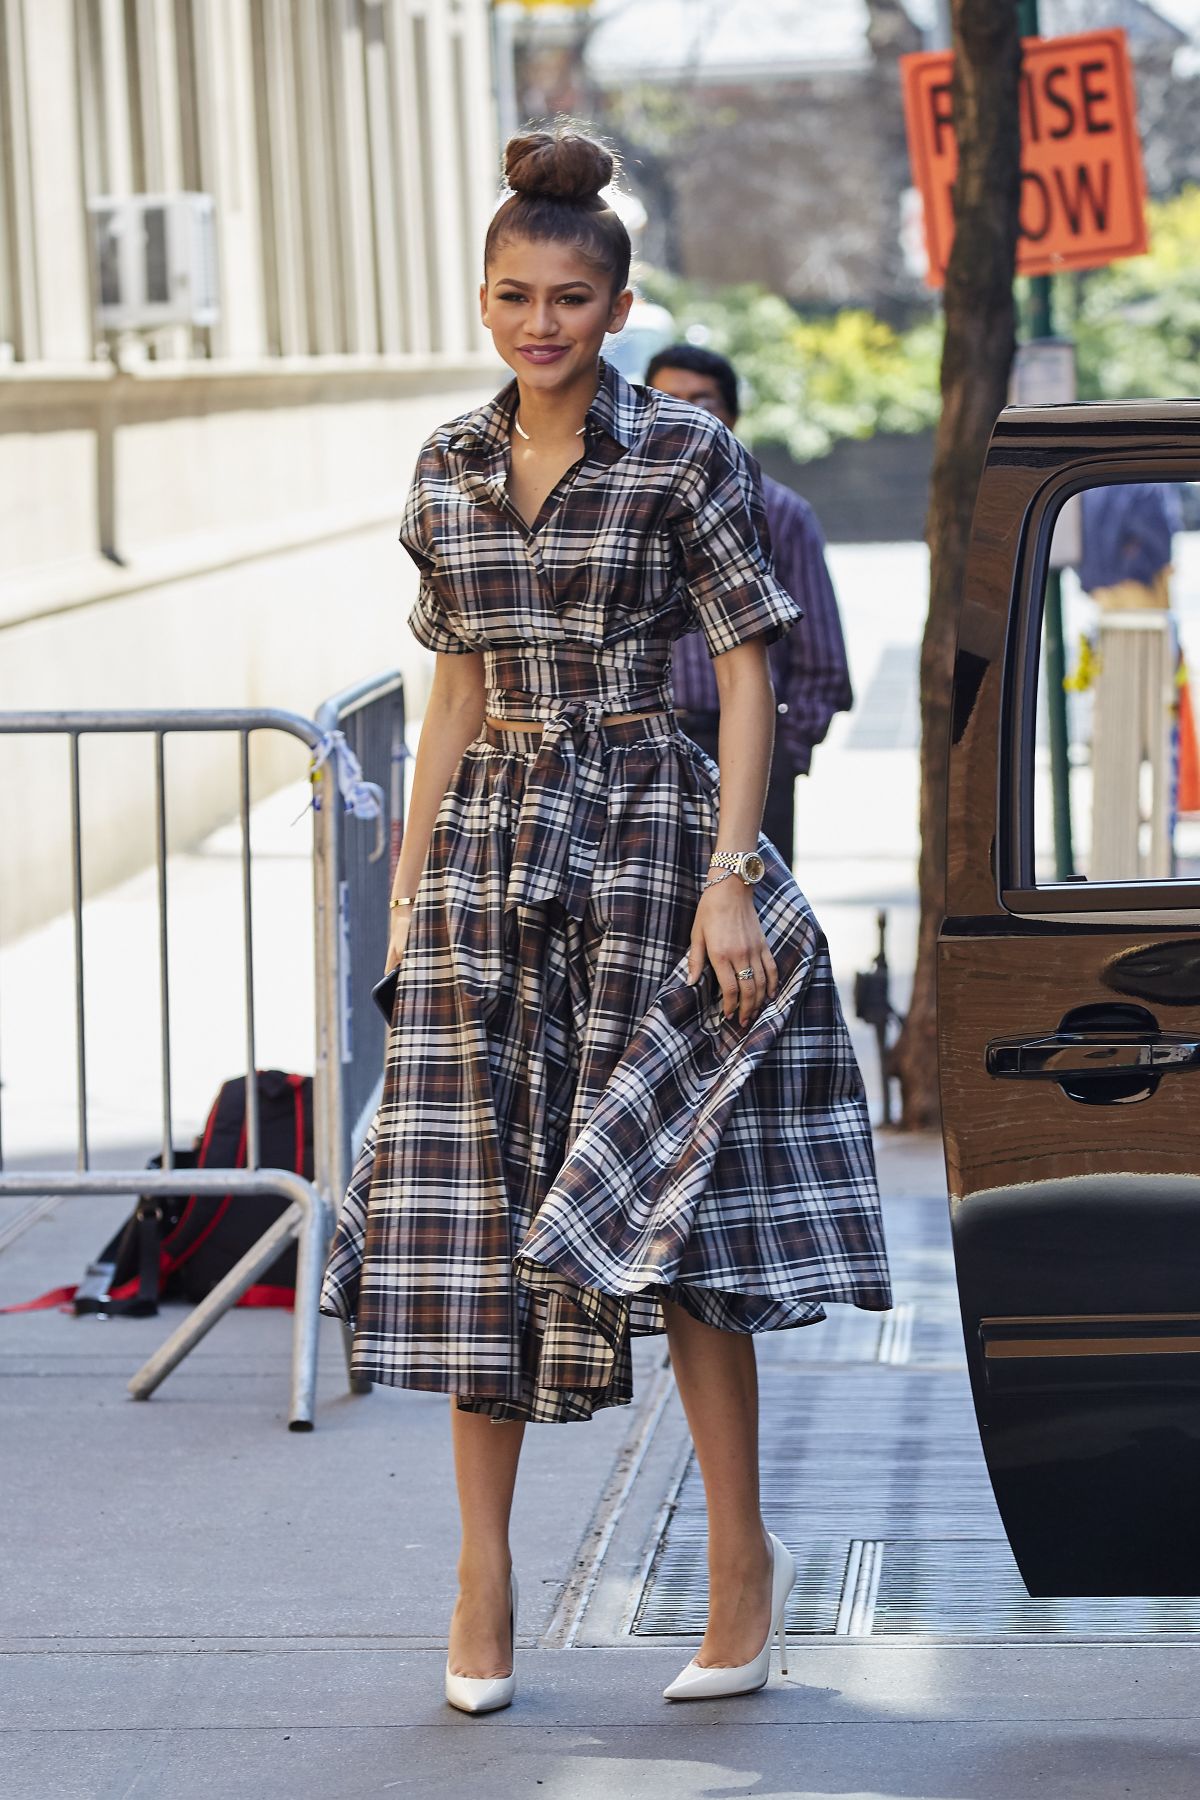 ZENDAYA COLEMAN Arrives at The View in New York 04/22/2015 - HawtCelebs